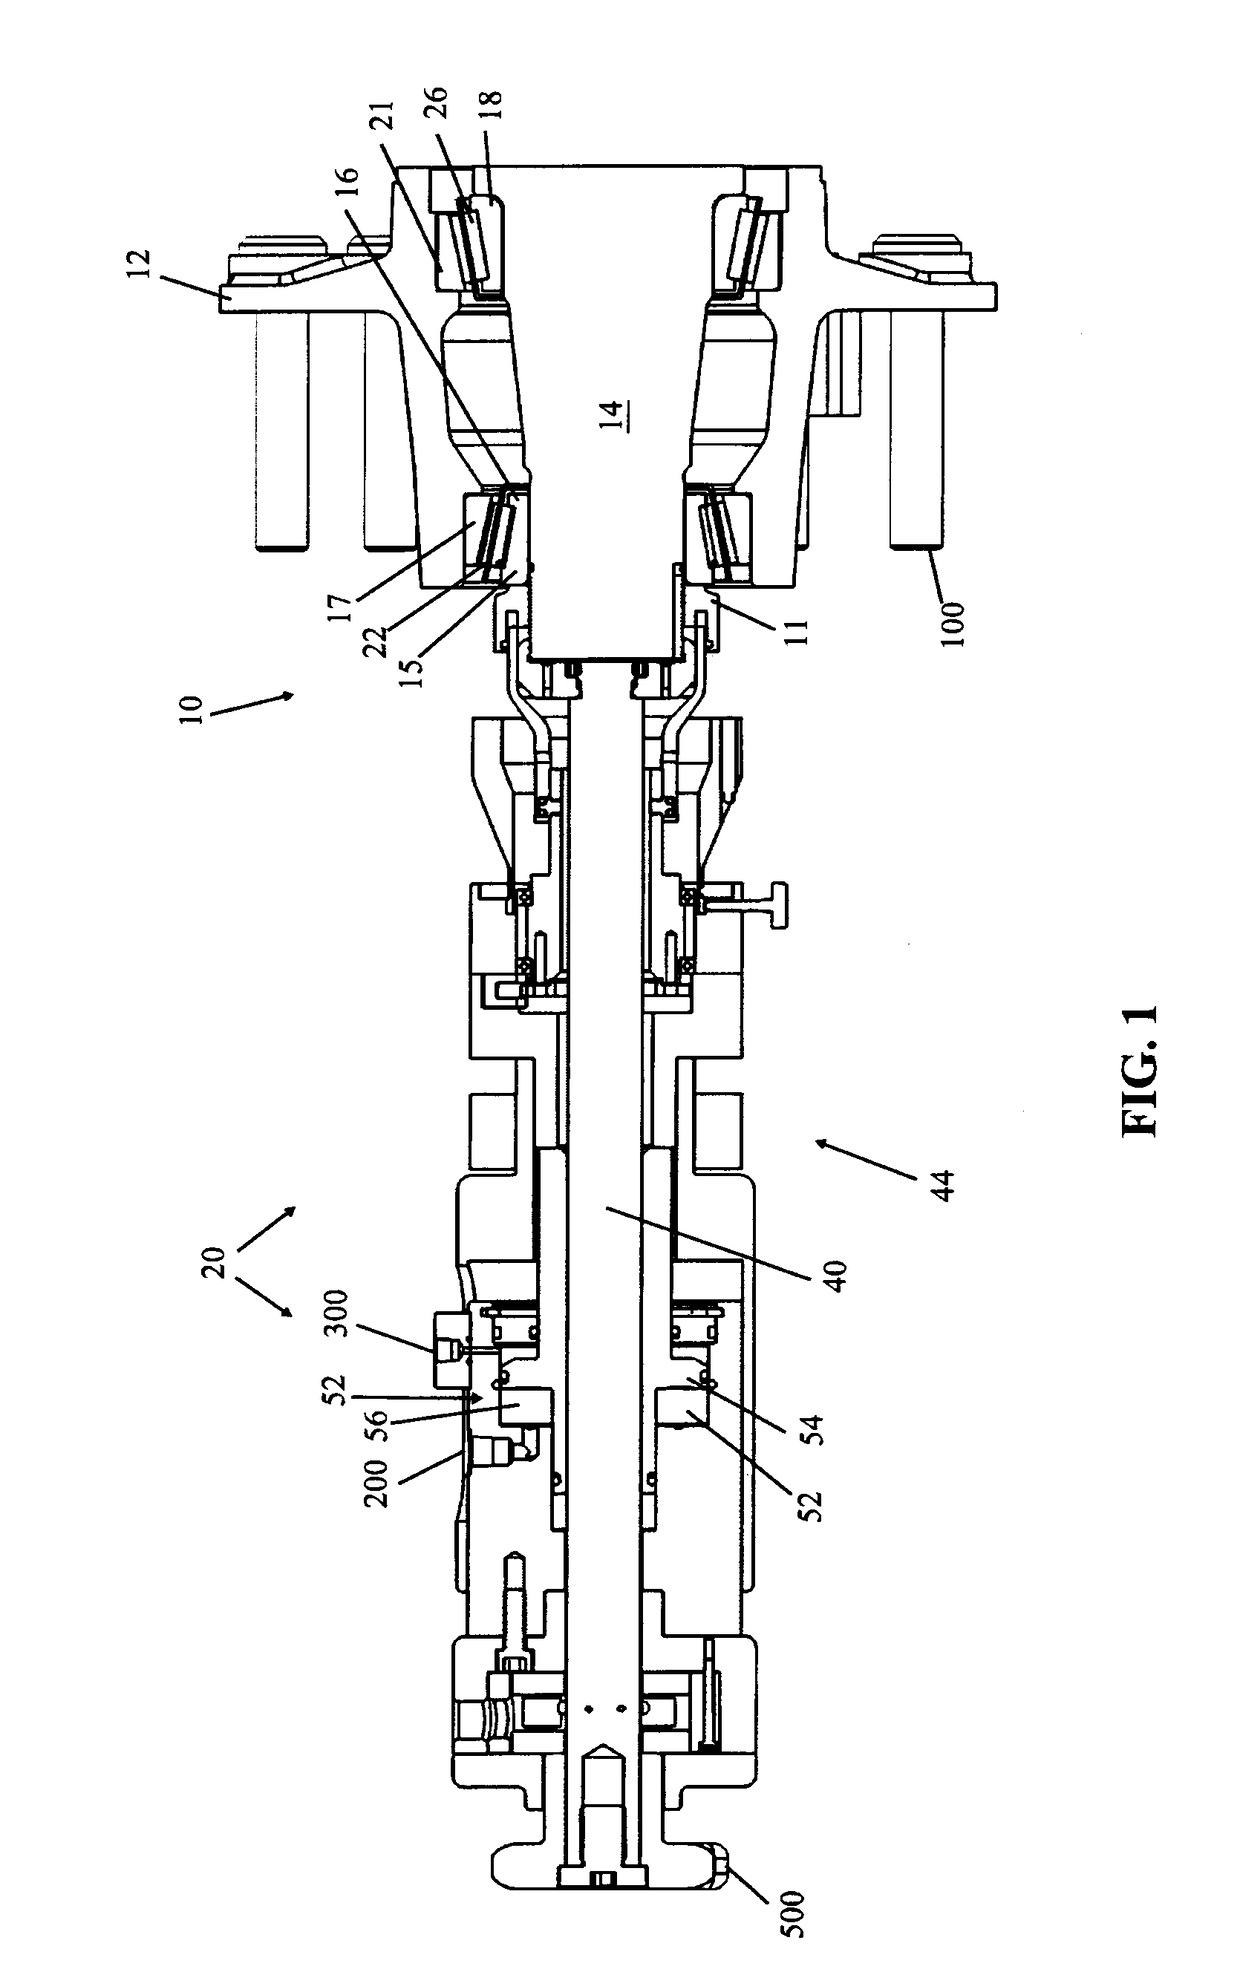 Systems and methods for preloading a bearing